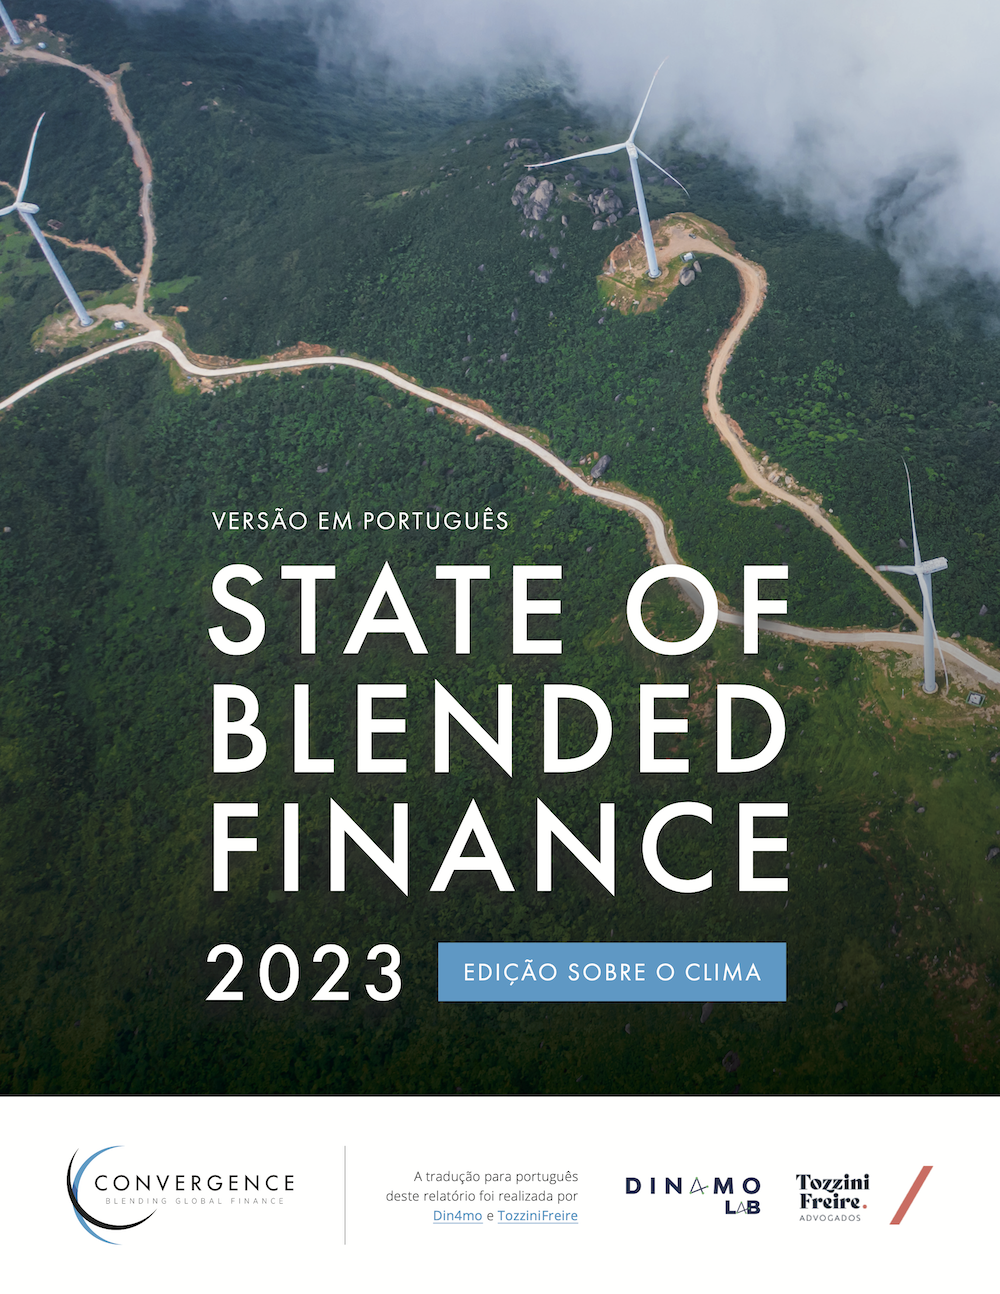 State of Blended Finance 2023 (Portuguese)